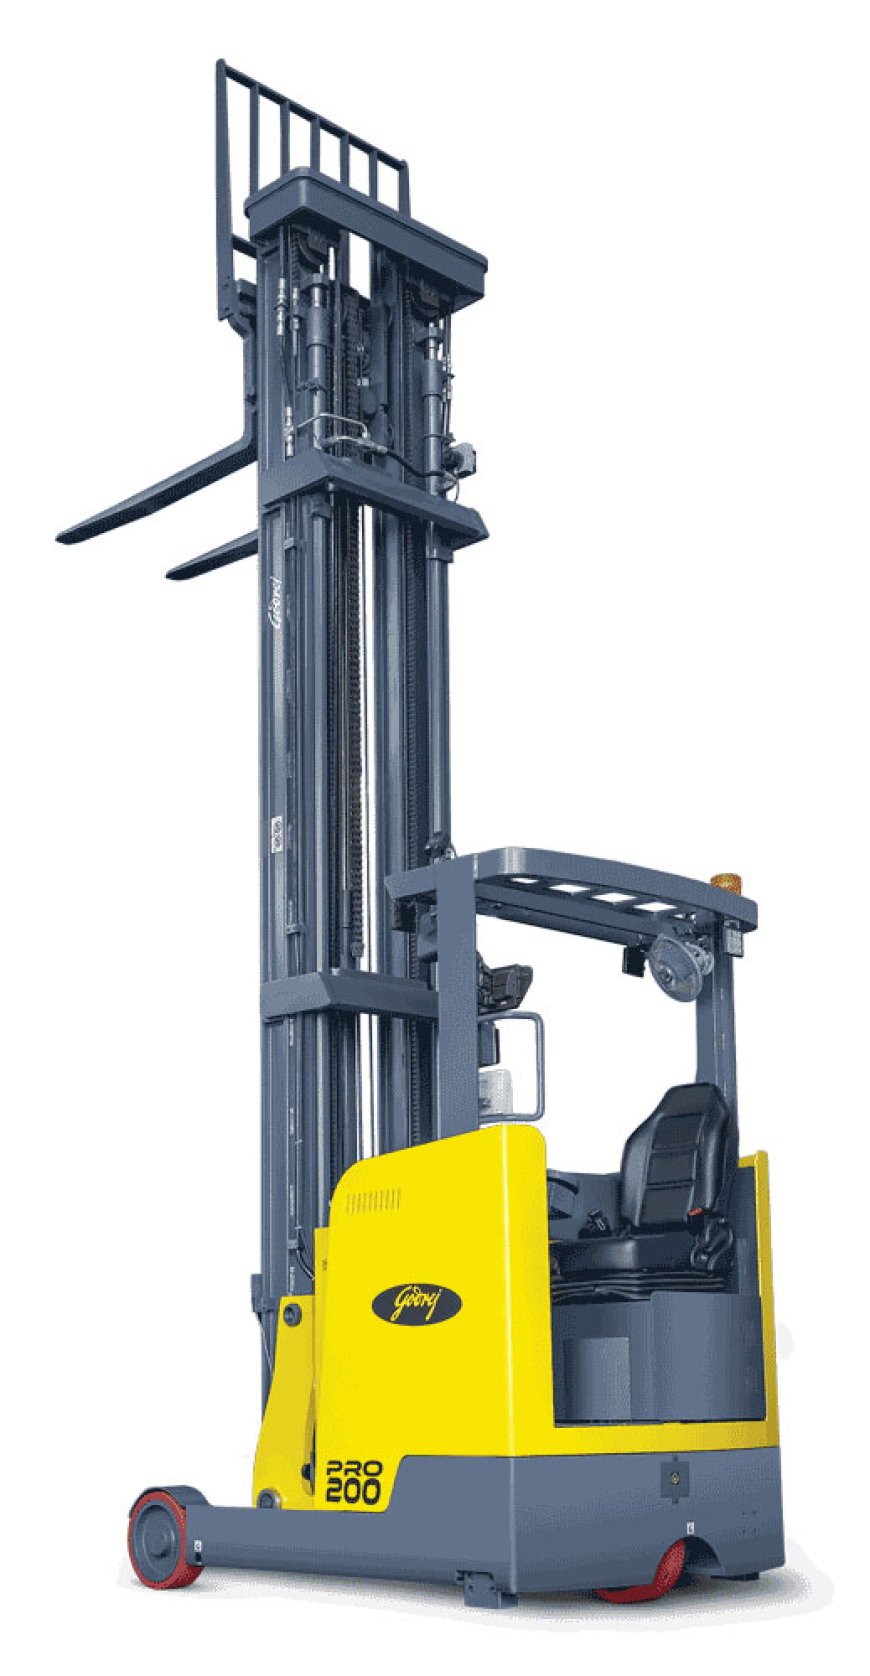 Godrej Material Handling Launches the new PRO Series Reach Truck